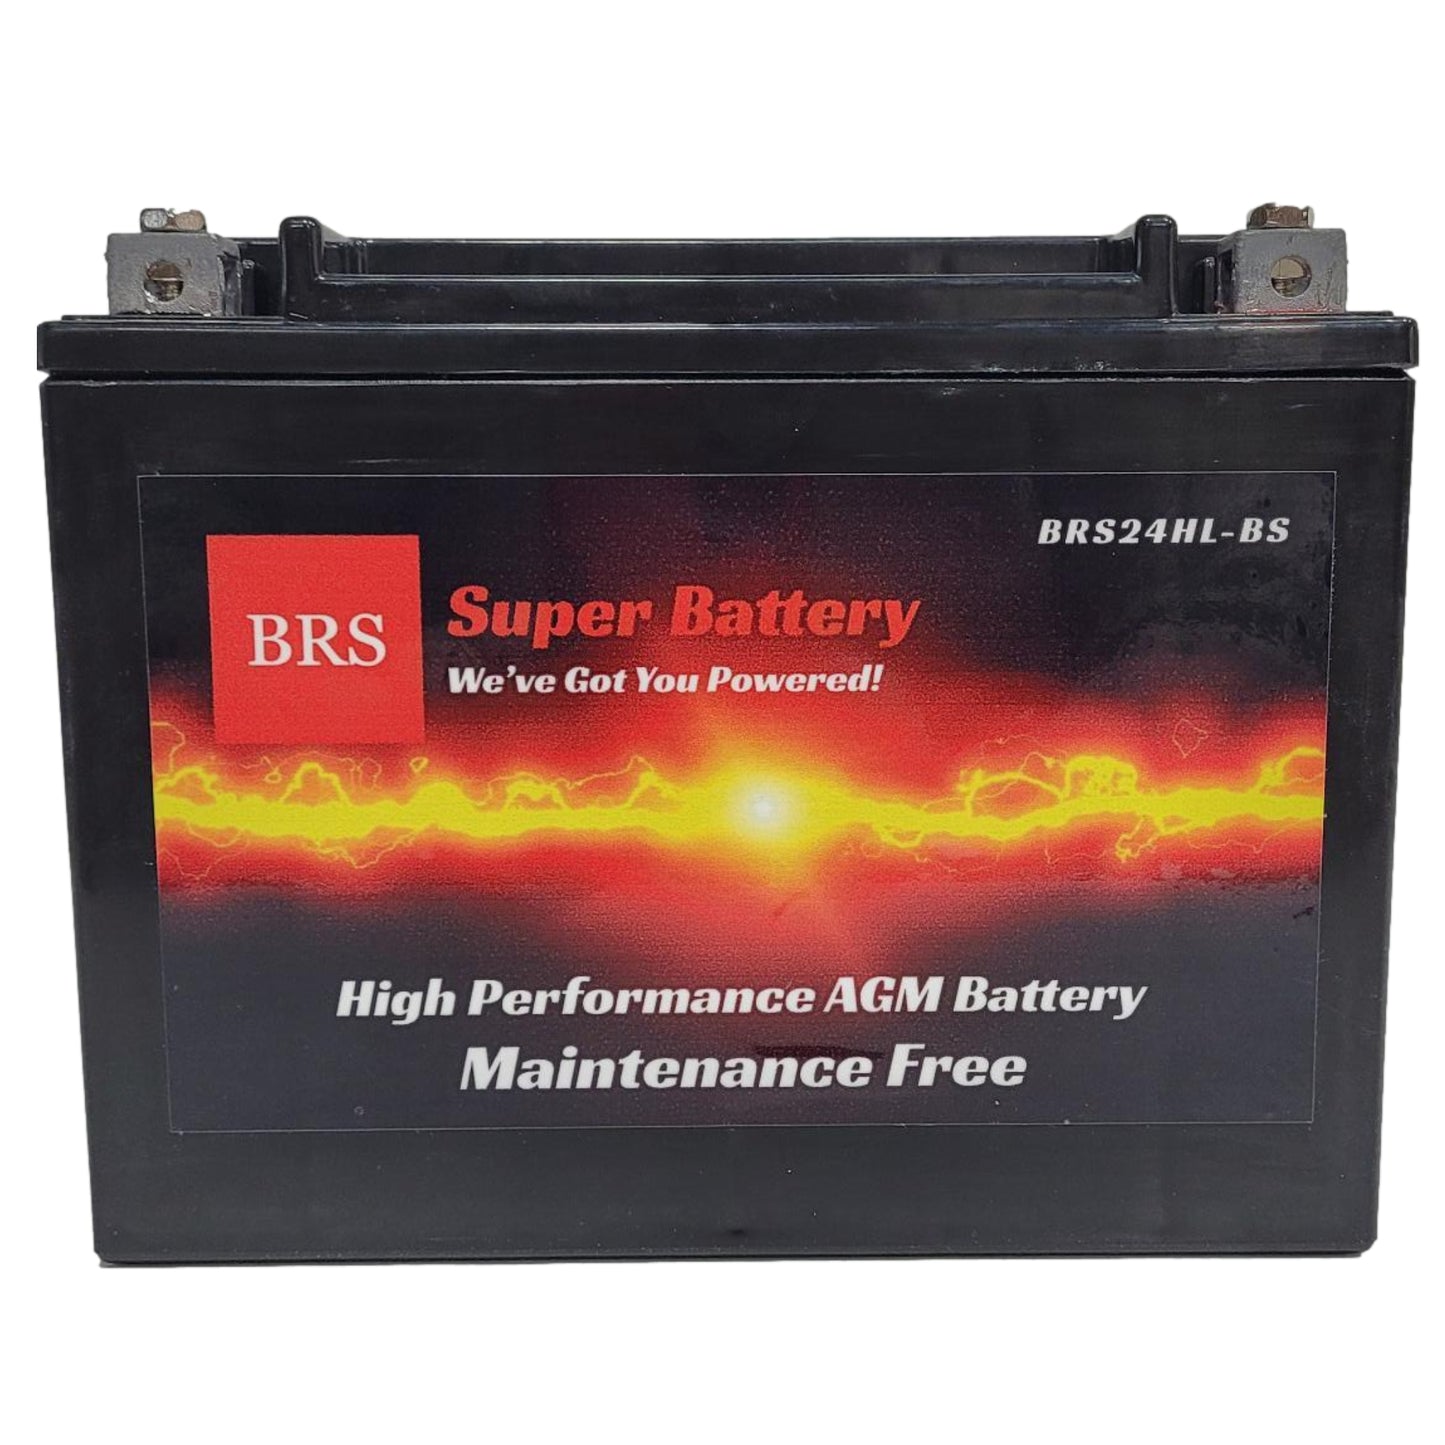 WPX24HL-BS 12v High Performance Sealed AGM PowerSport 10 Year Battery - BRS Super Battery